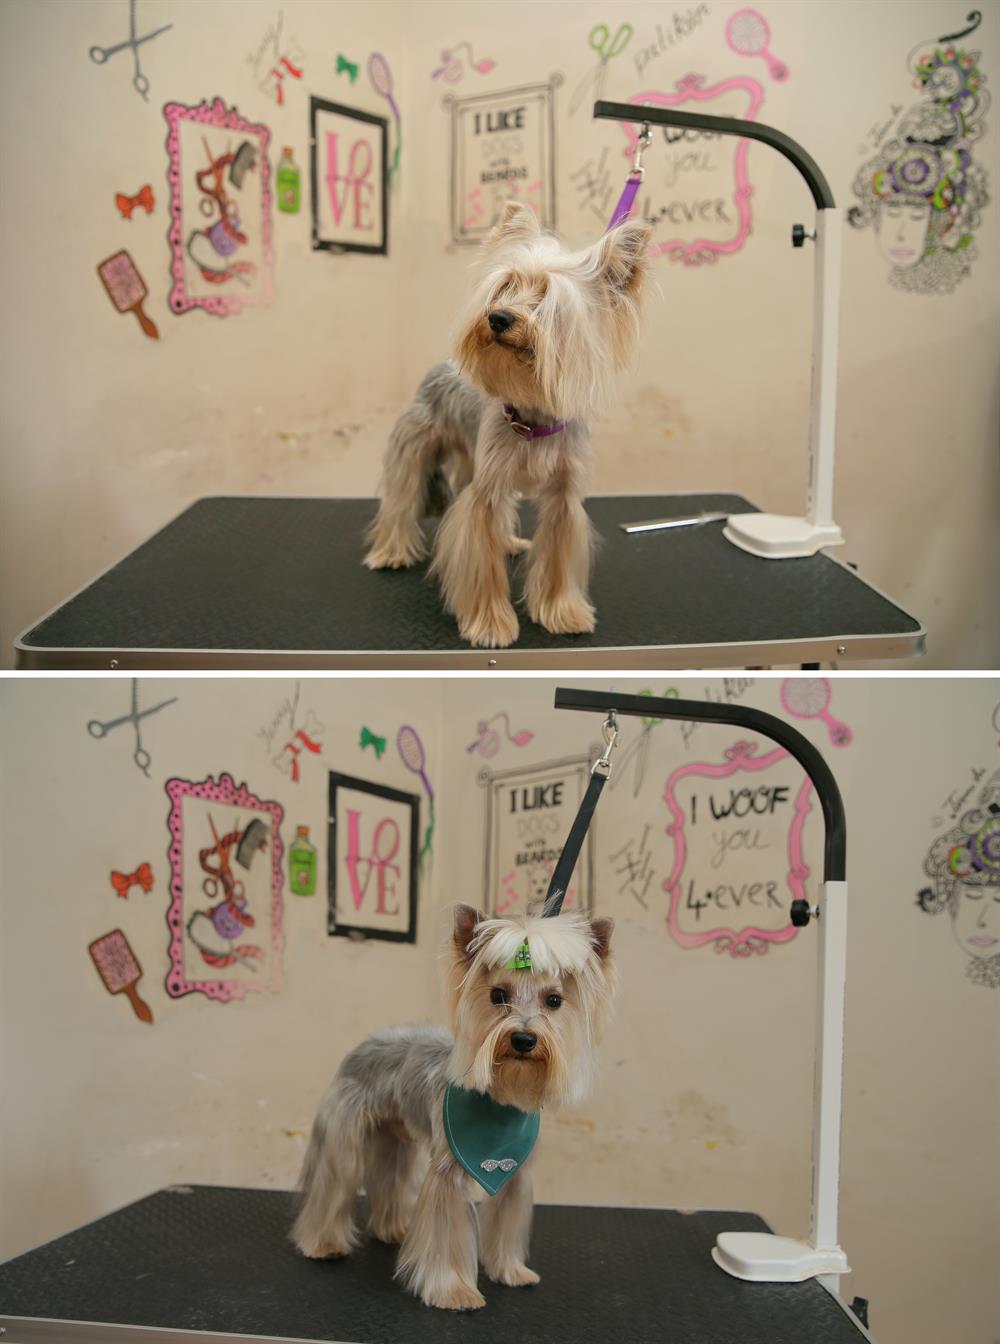 Pets get pampered at beauty shop in Turkey's Izmir